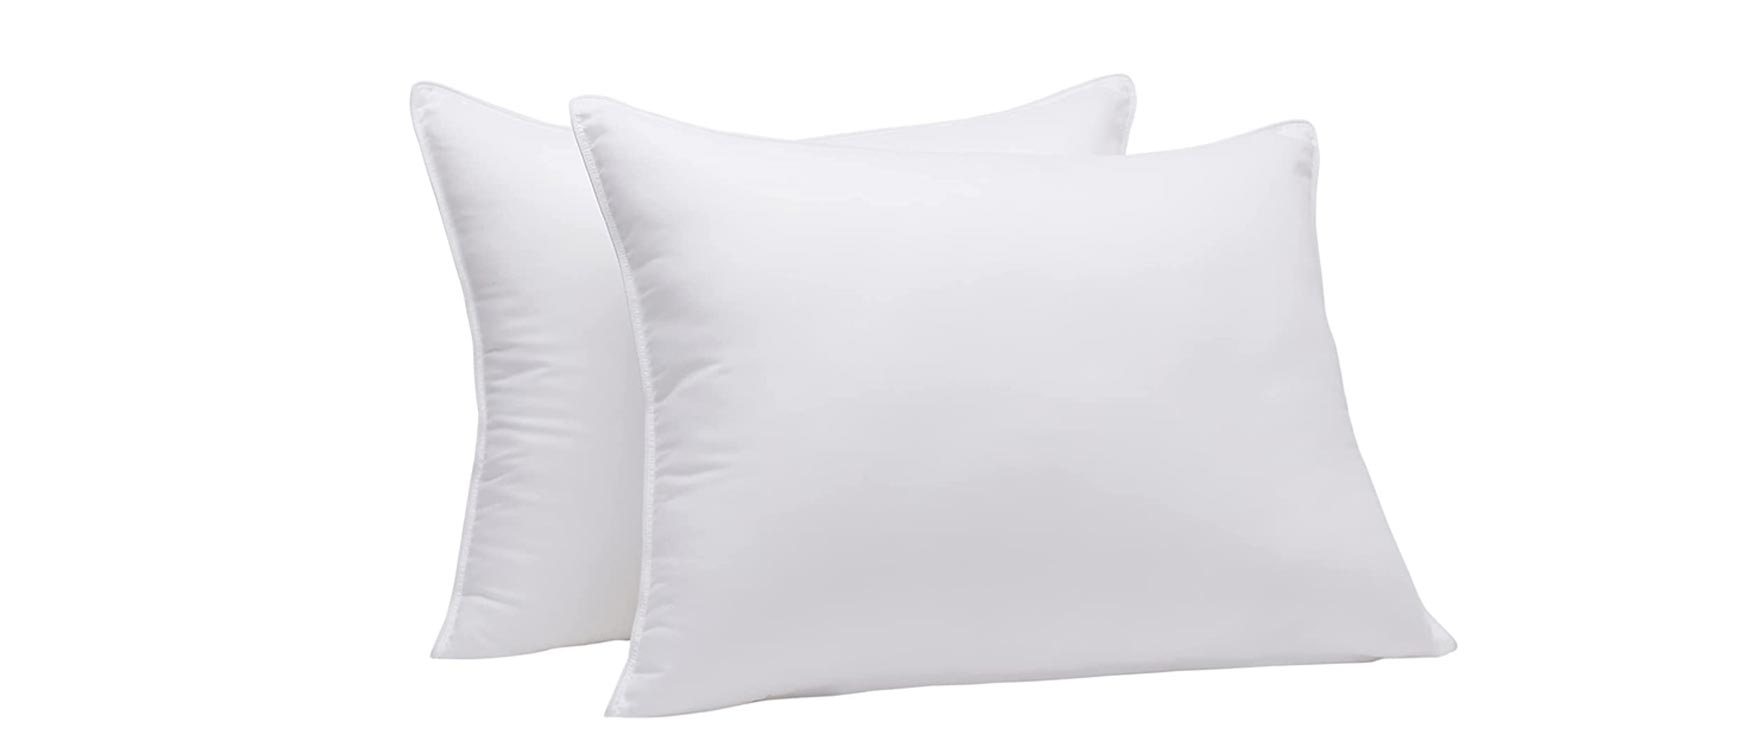 2. Best Value for Stomach Sleepers: Amazon Basics Down Alternative Bed Pillows